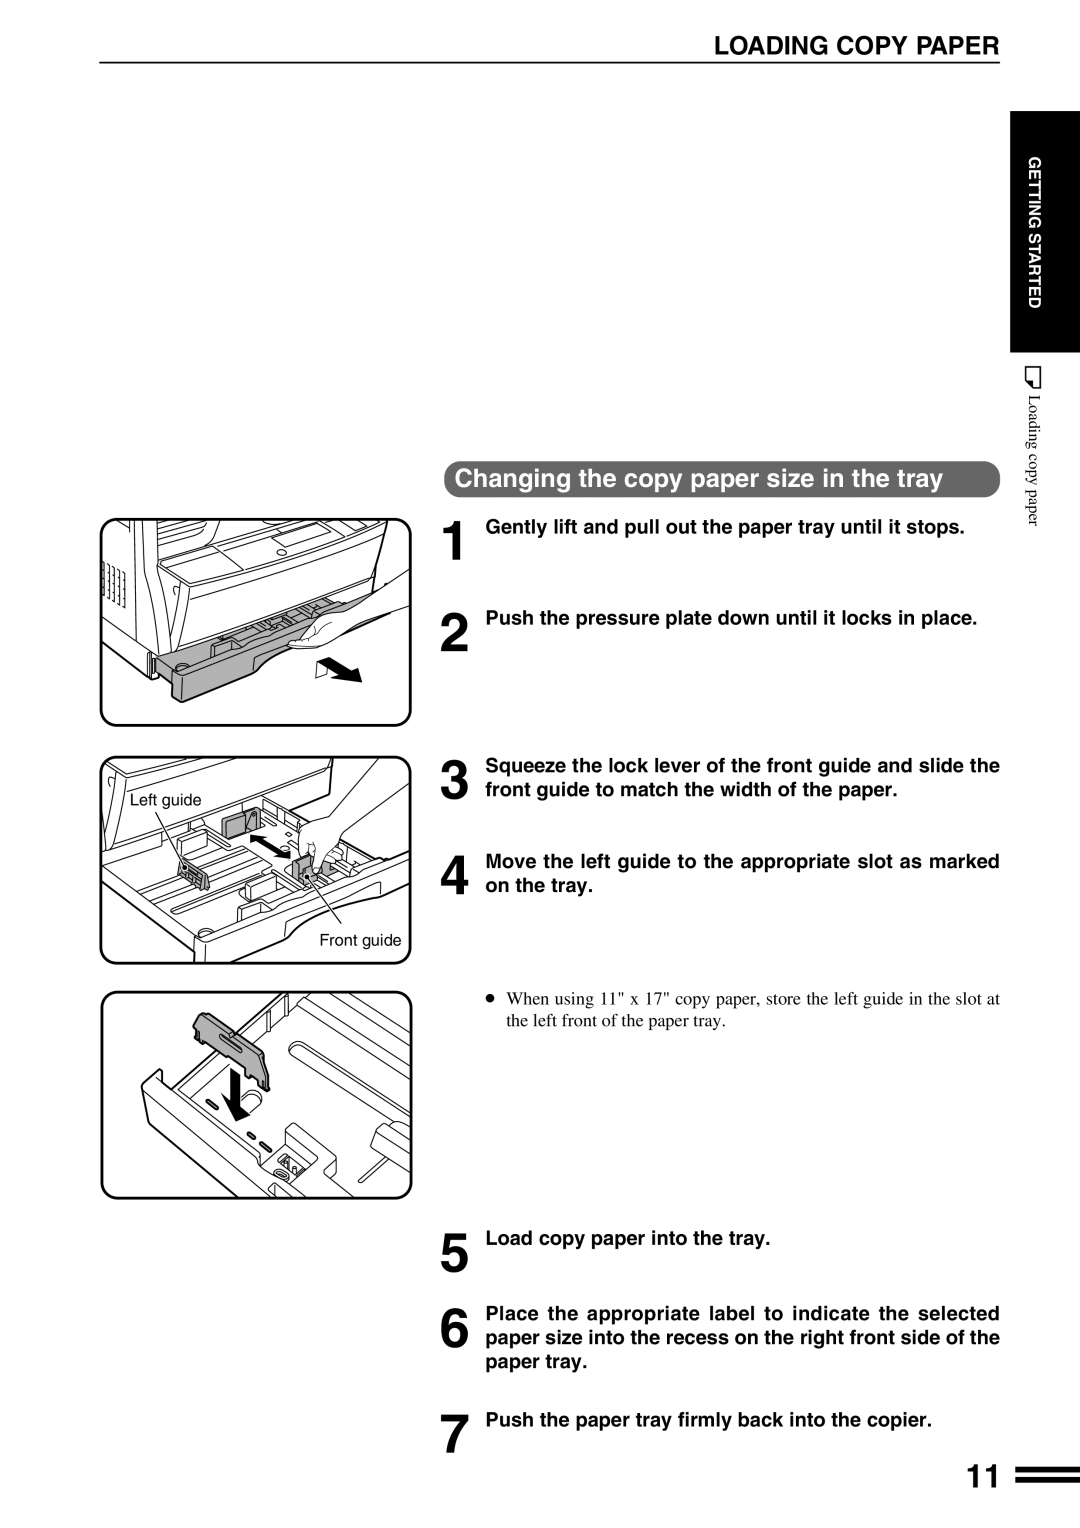 Sharp AR-162S Loading Copy Paper, Squeeze the lock lever of the front guide and slide the, Left guide, Getting Started 